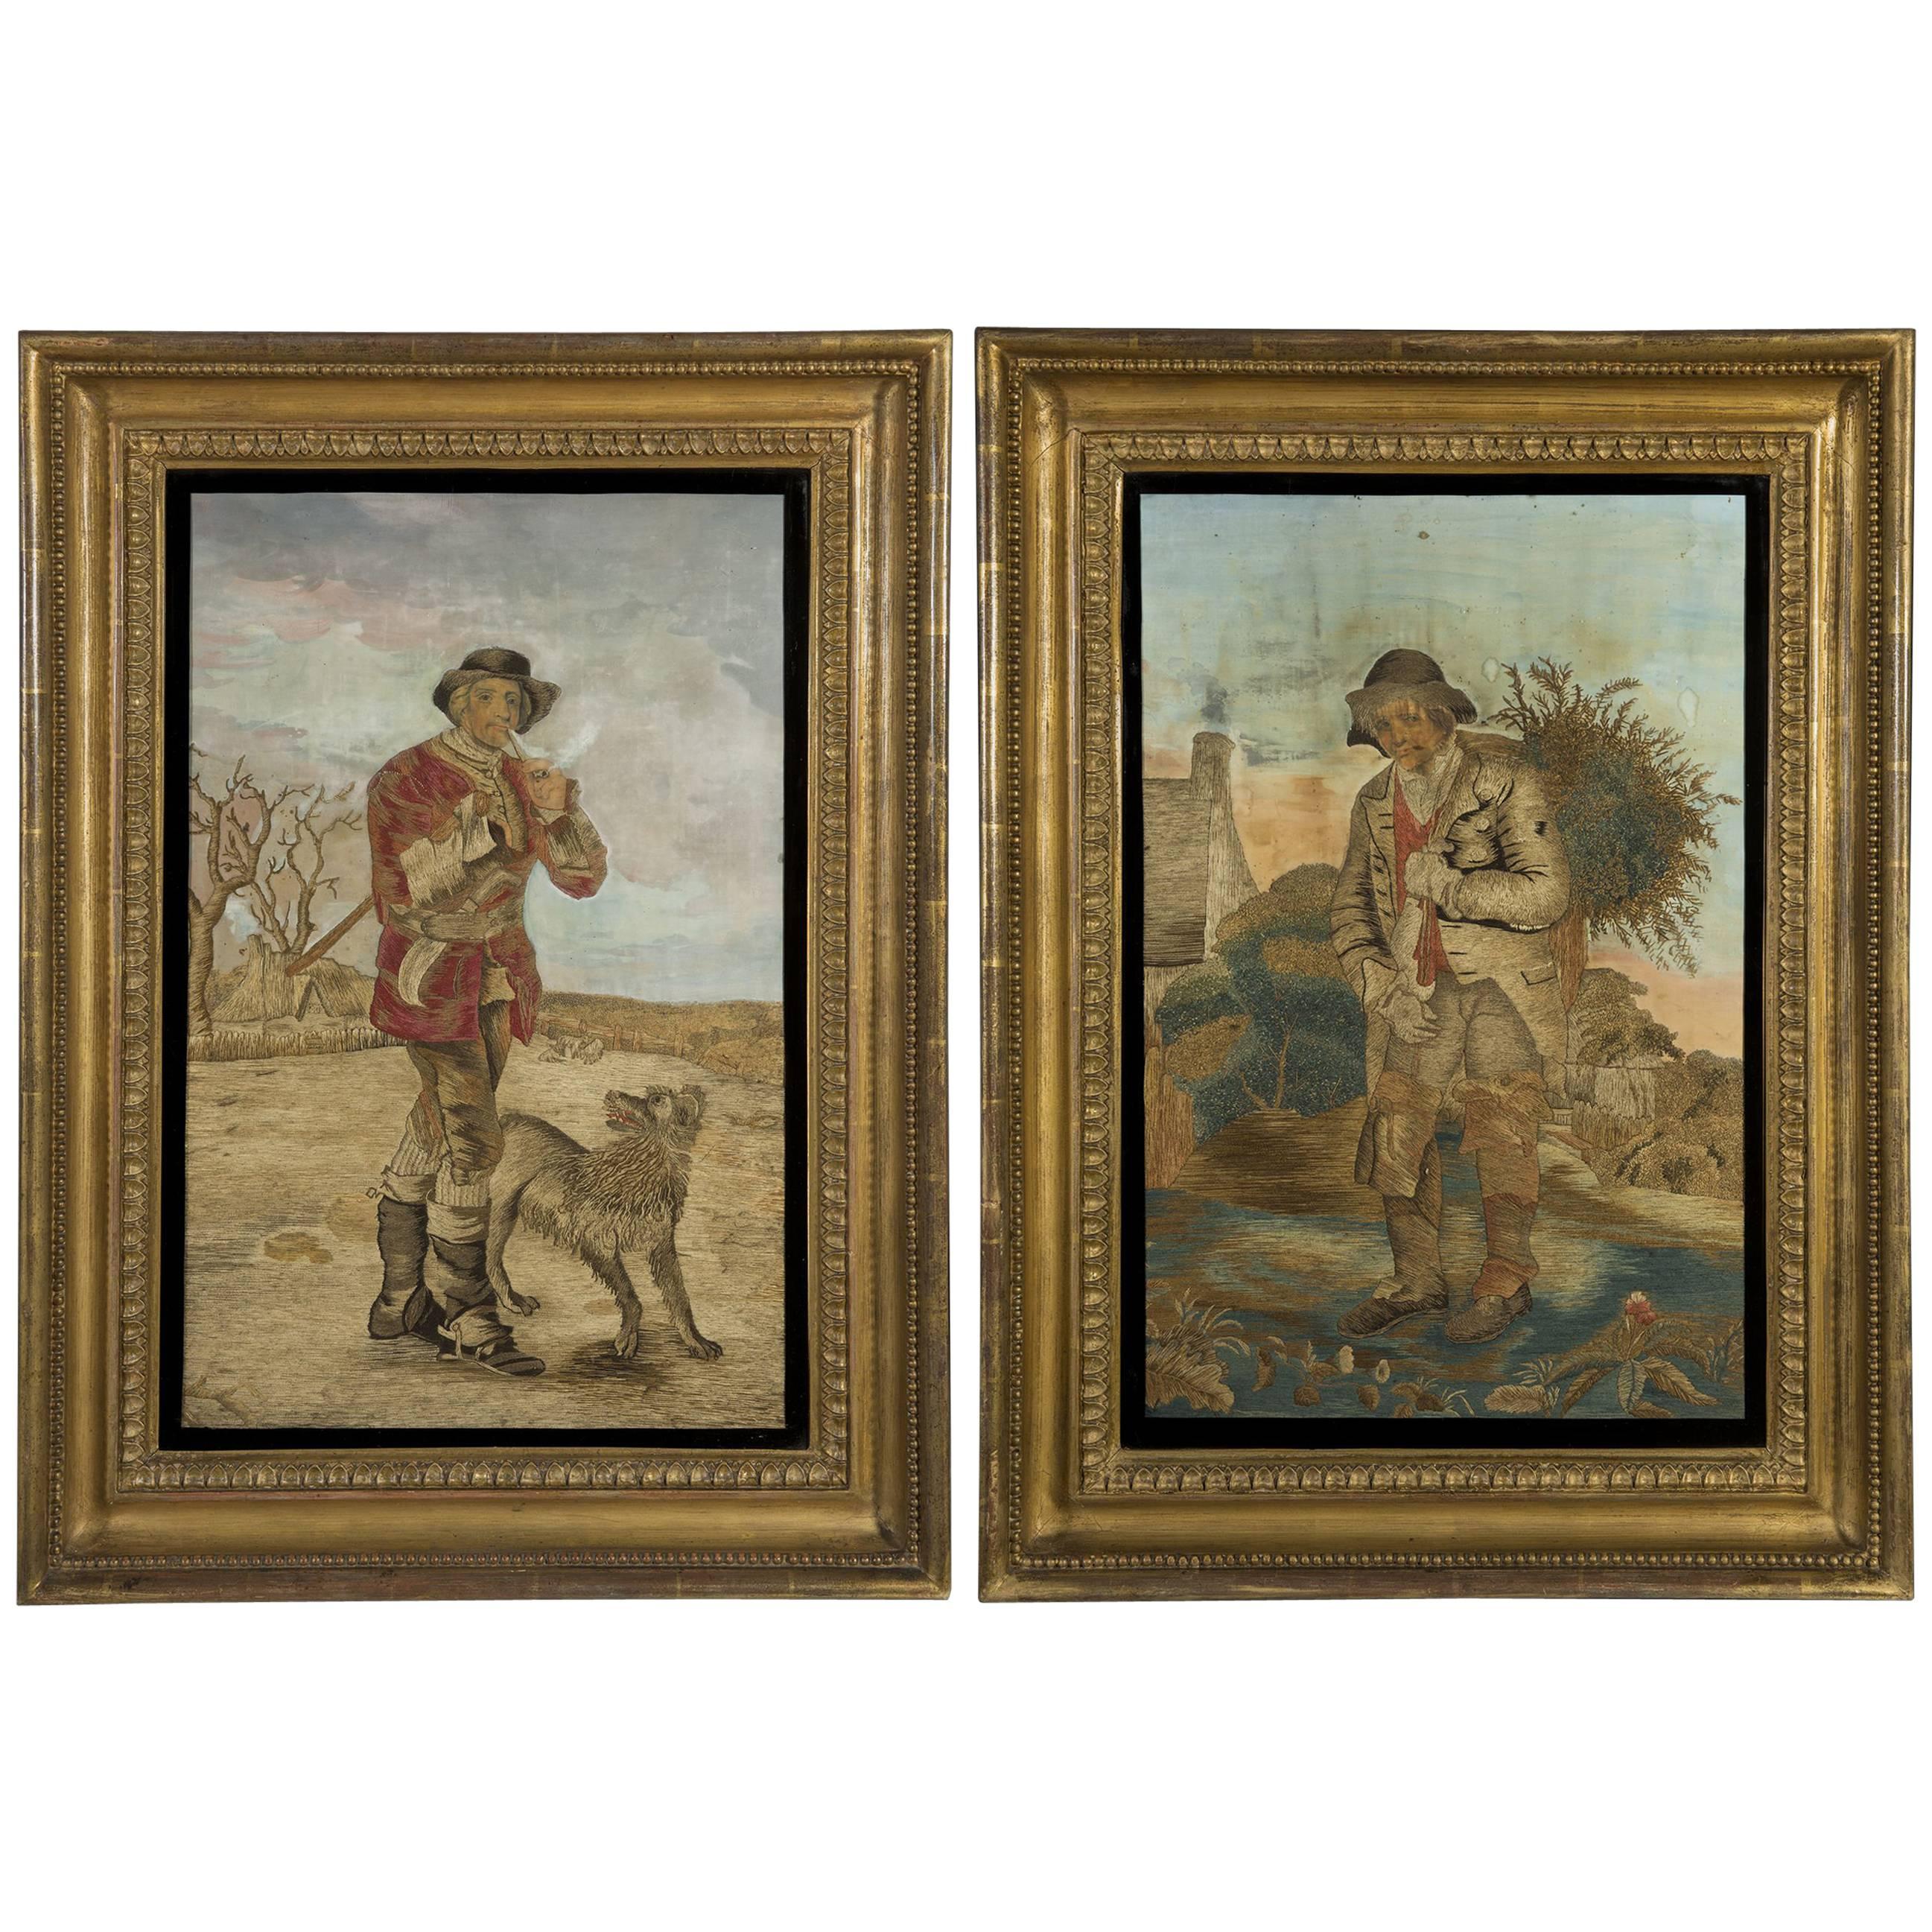 Pair of Embroidery & Needlework Pictures of "The Woodman and "The Furze Cutter"